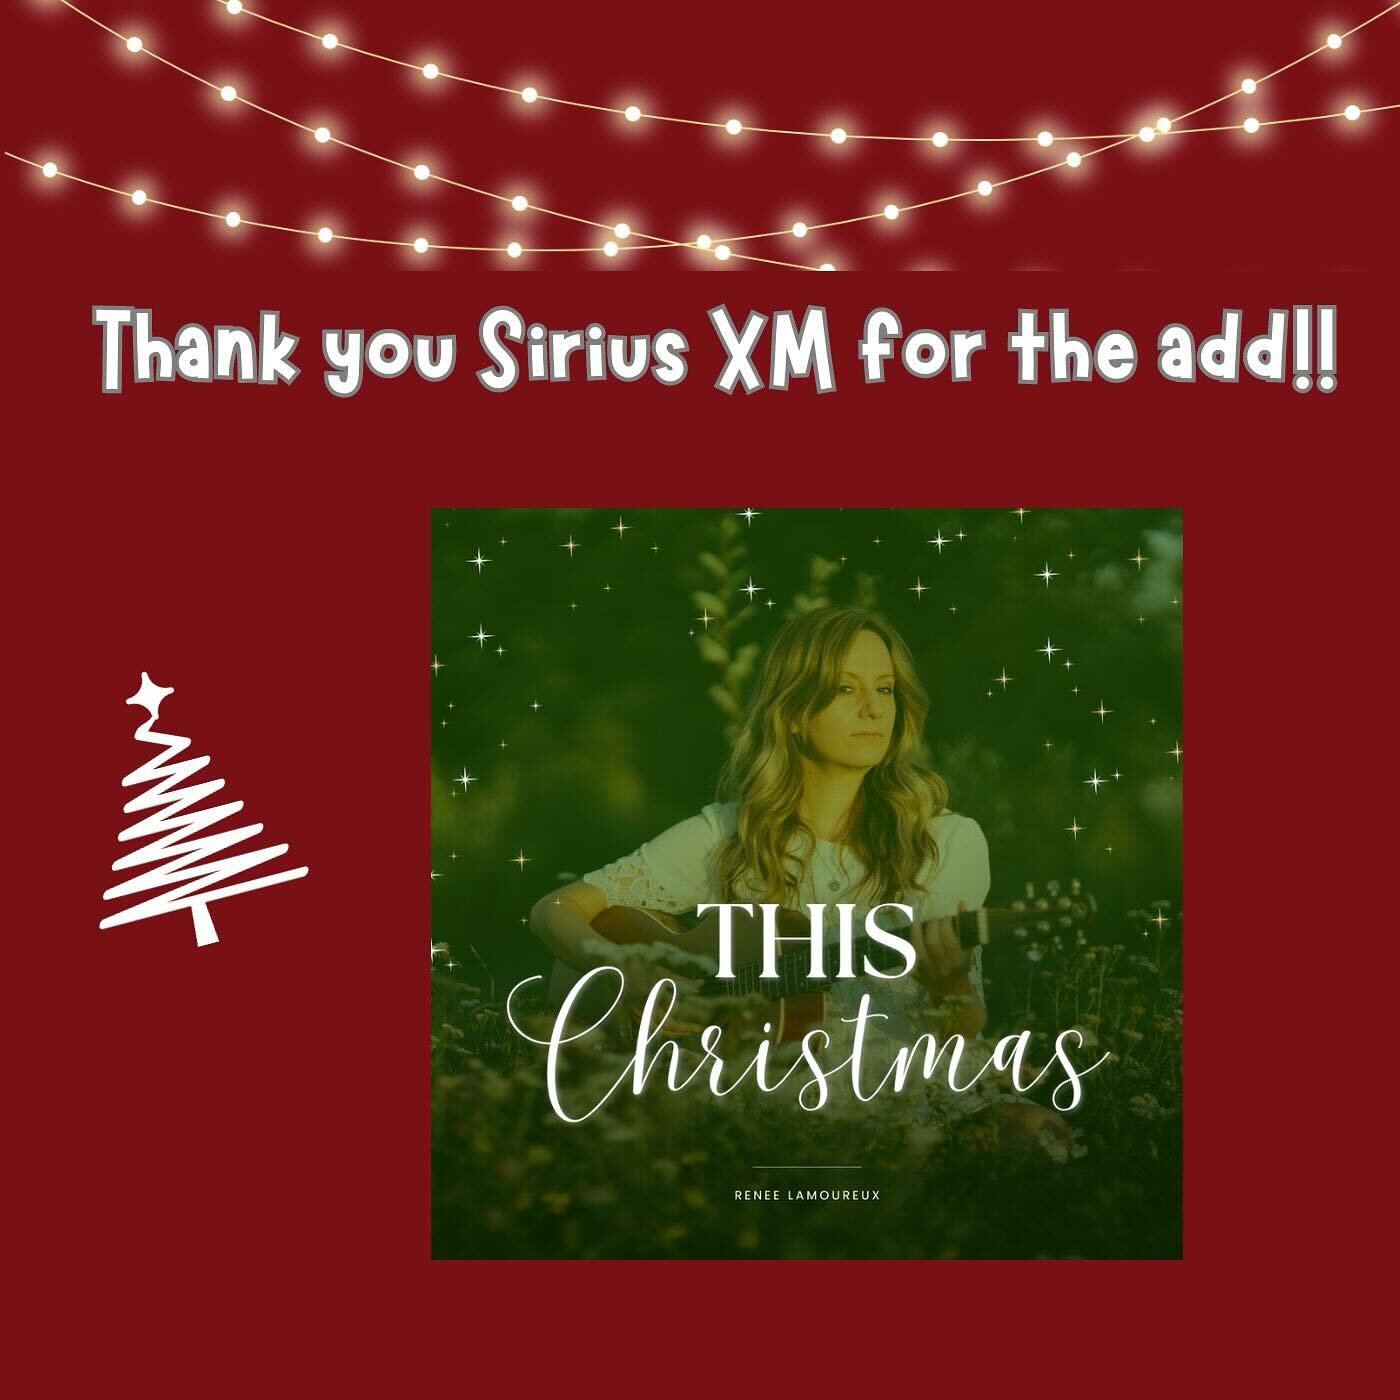 Thanks so much for the add @siriusxmcountry!! 😘 

Check out the music on ch 171 including my new holiday song This Christmas!! 
🎄🎄🎄🎄🎄🎄🎄